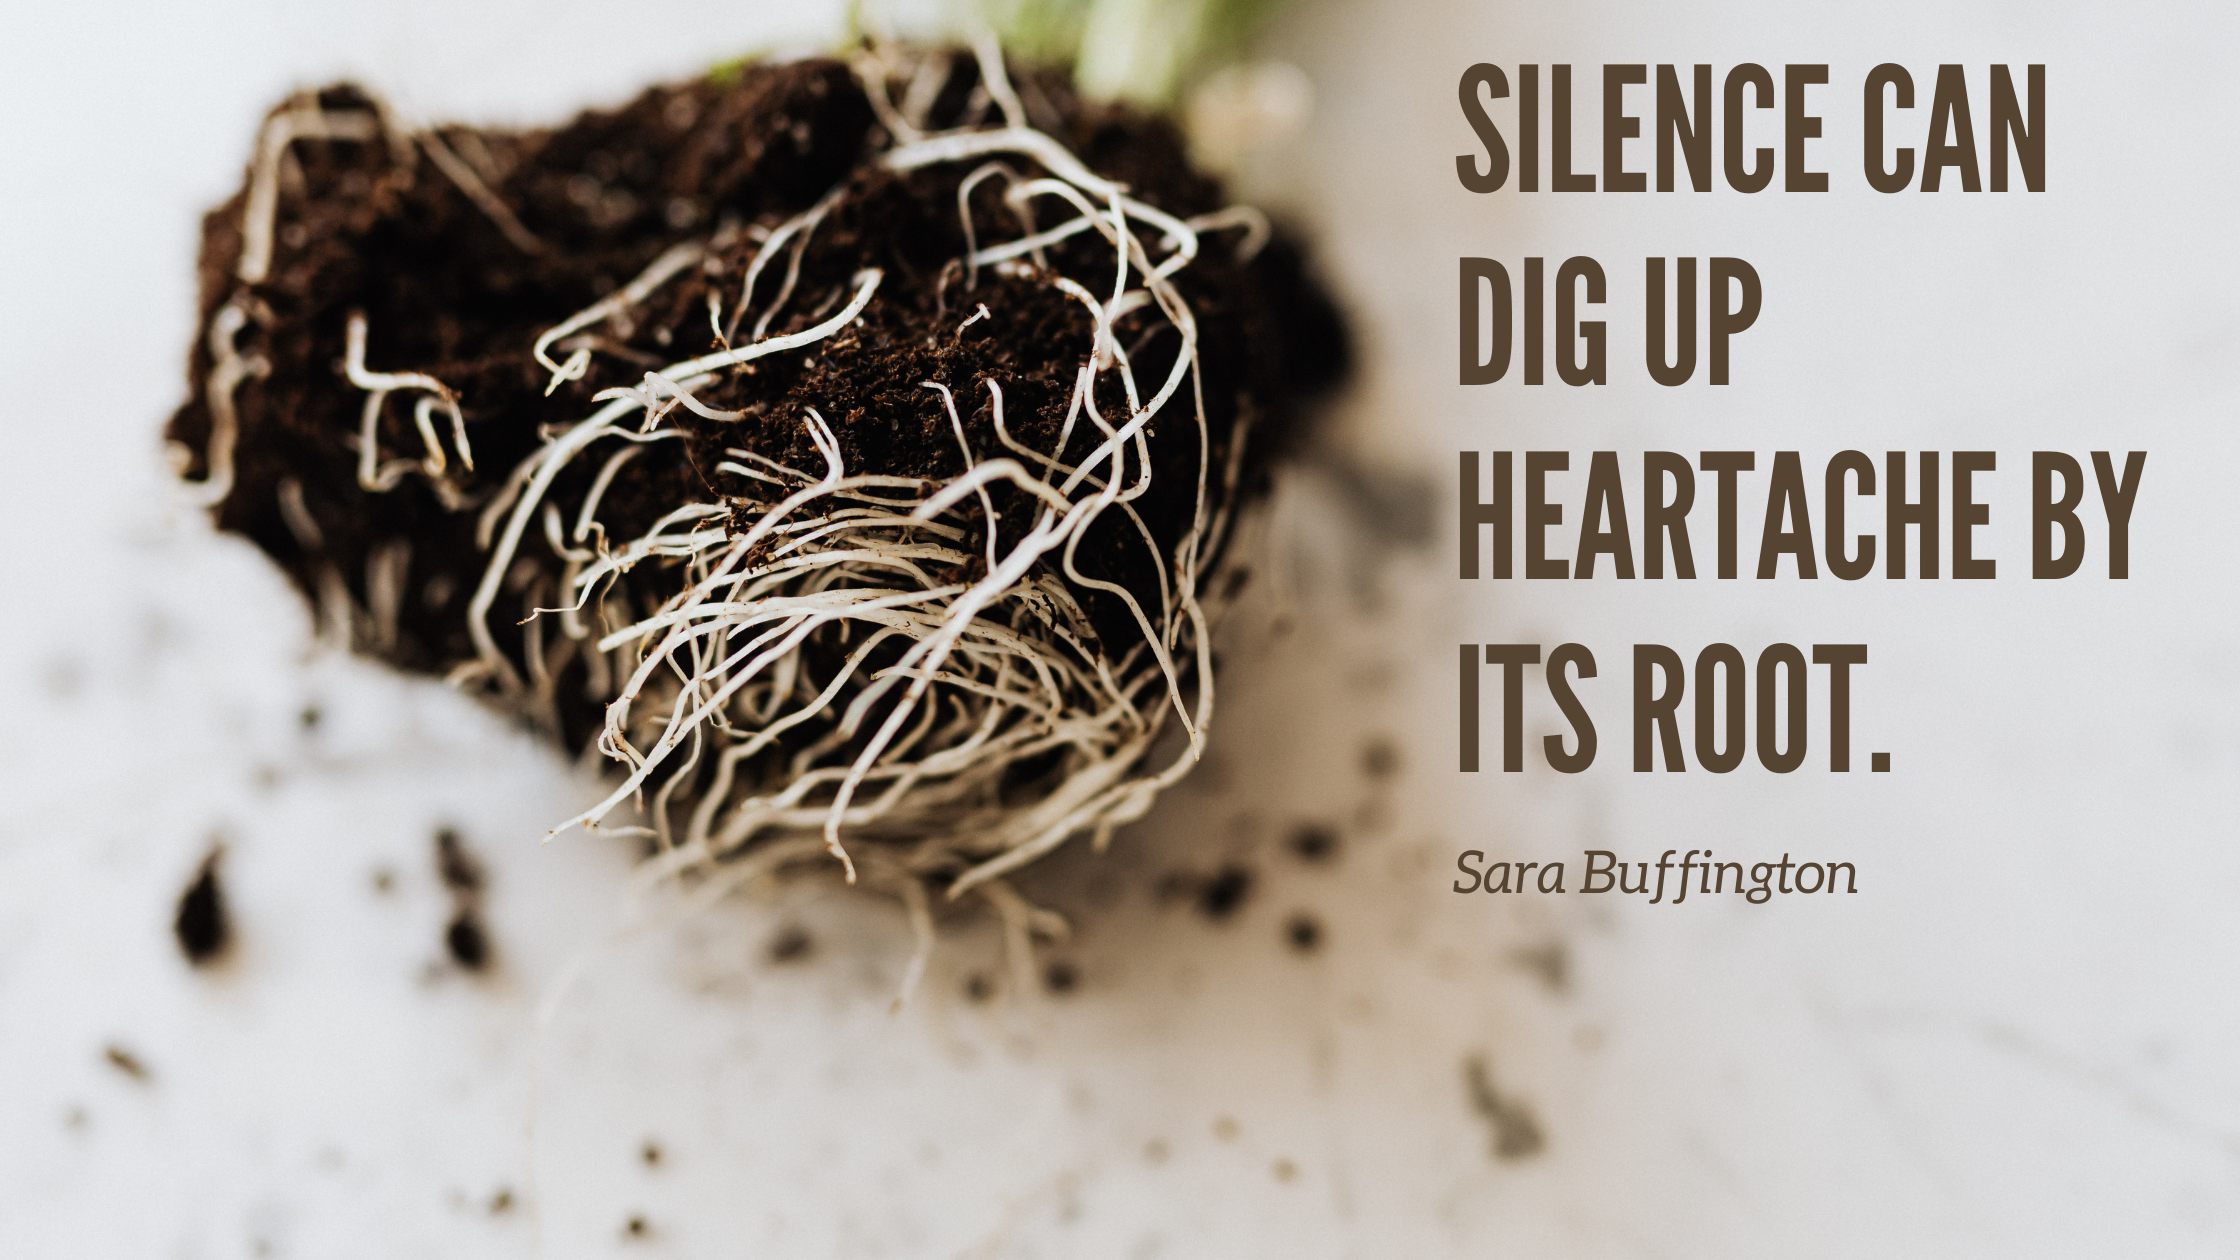 Silence can dig up heartache by its root.